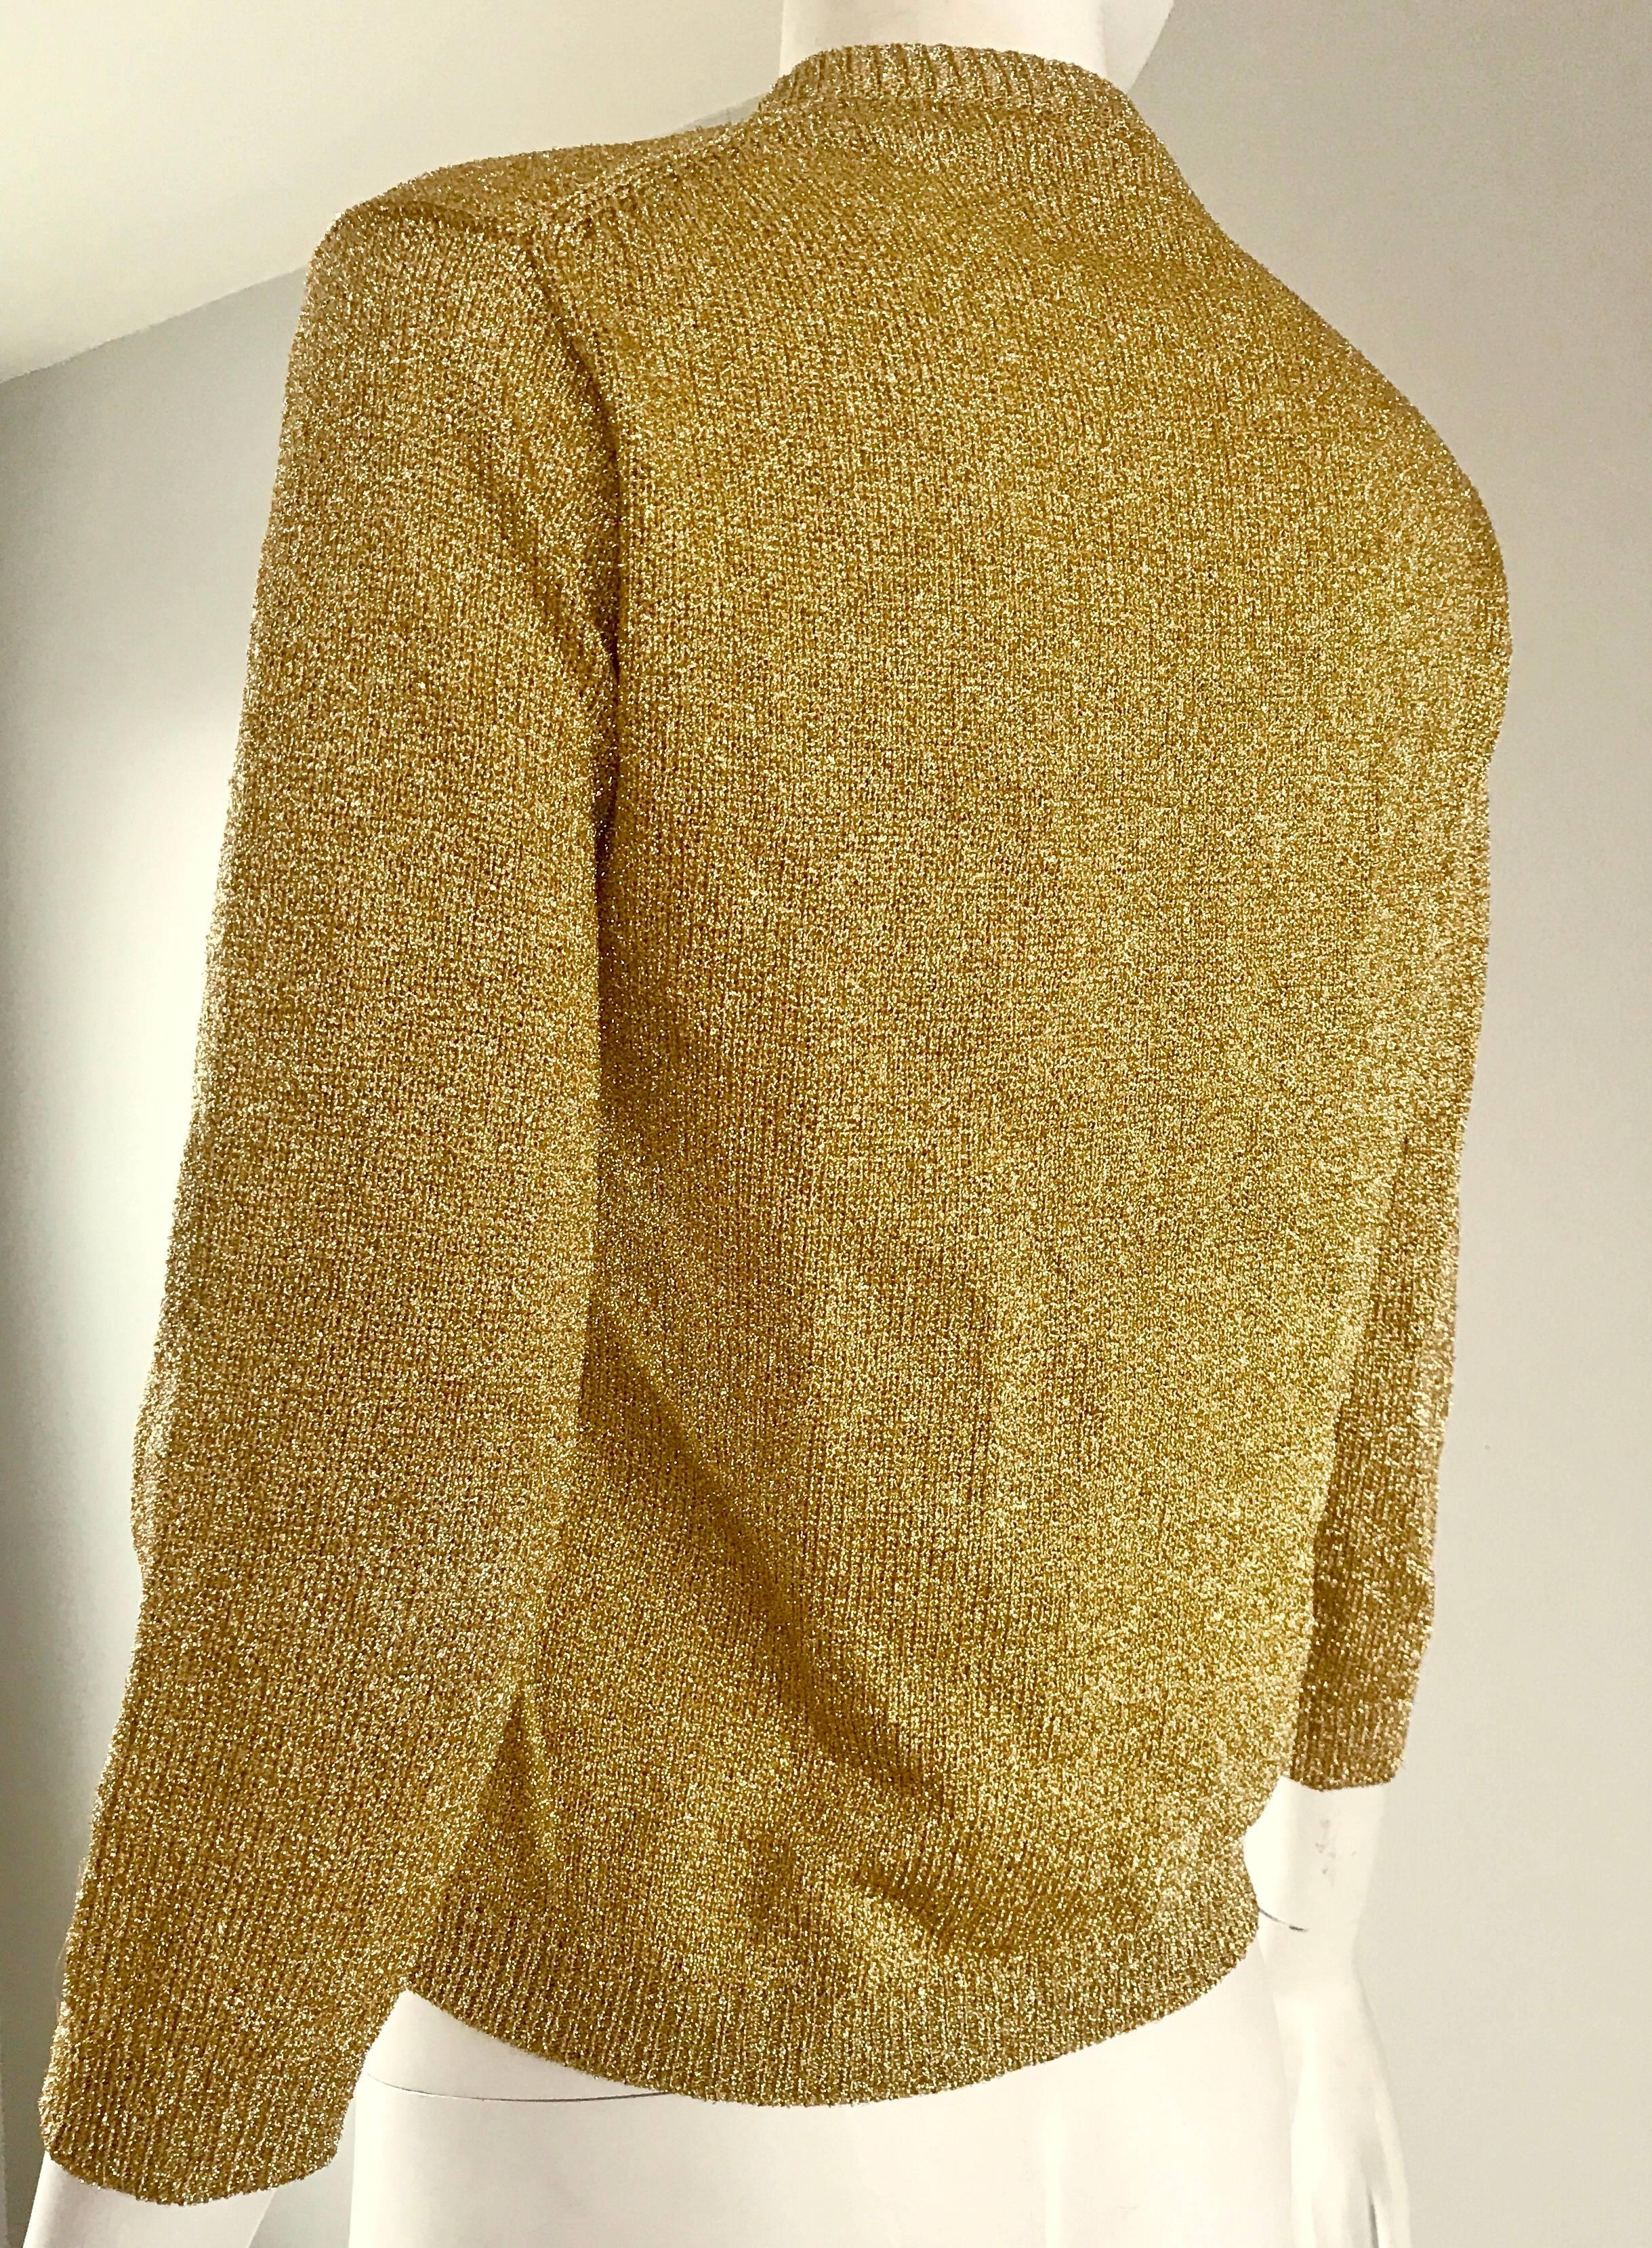 1950s Gold Metallic Lurex 3/4 Sleeves French Made Vintage 50s Cardigan Sweater In Excellent Condition For Sale In San Diego, CA